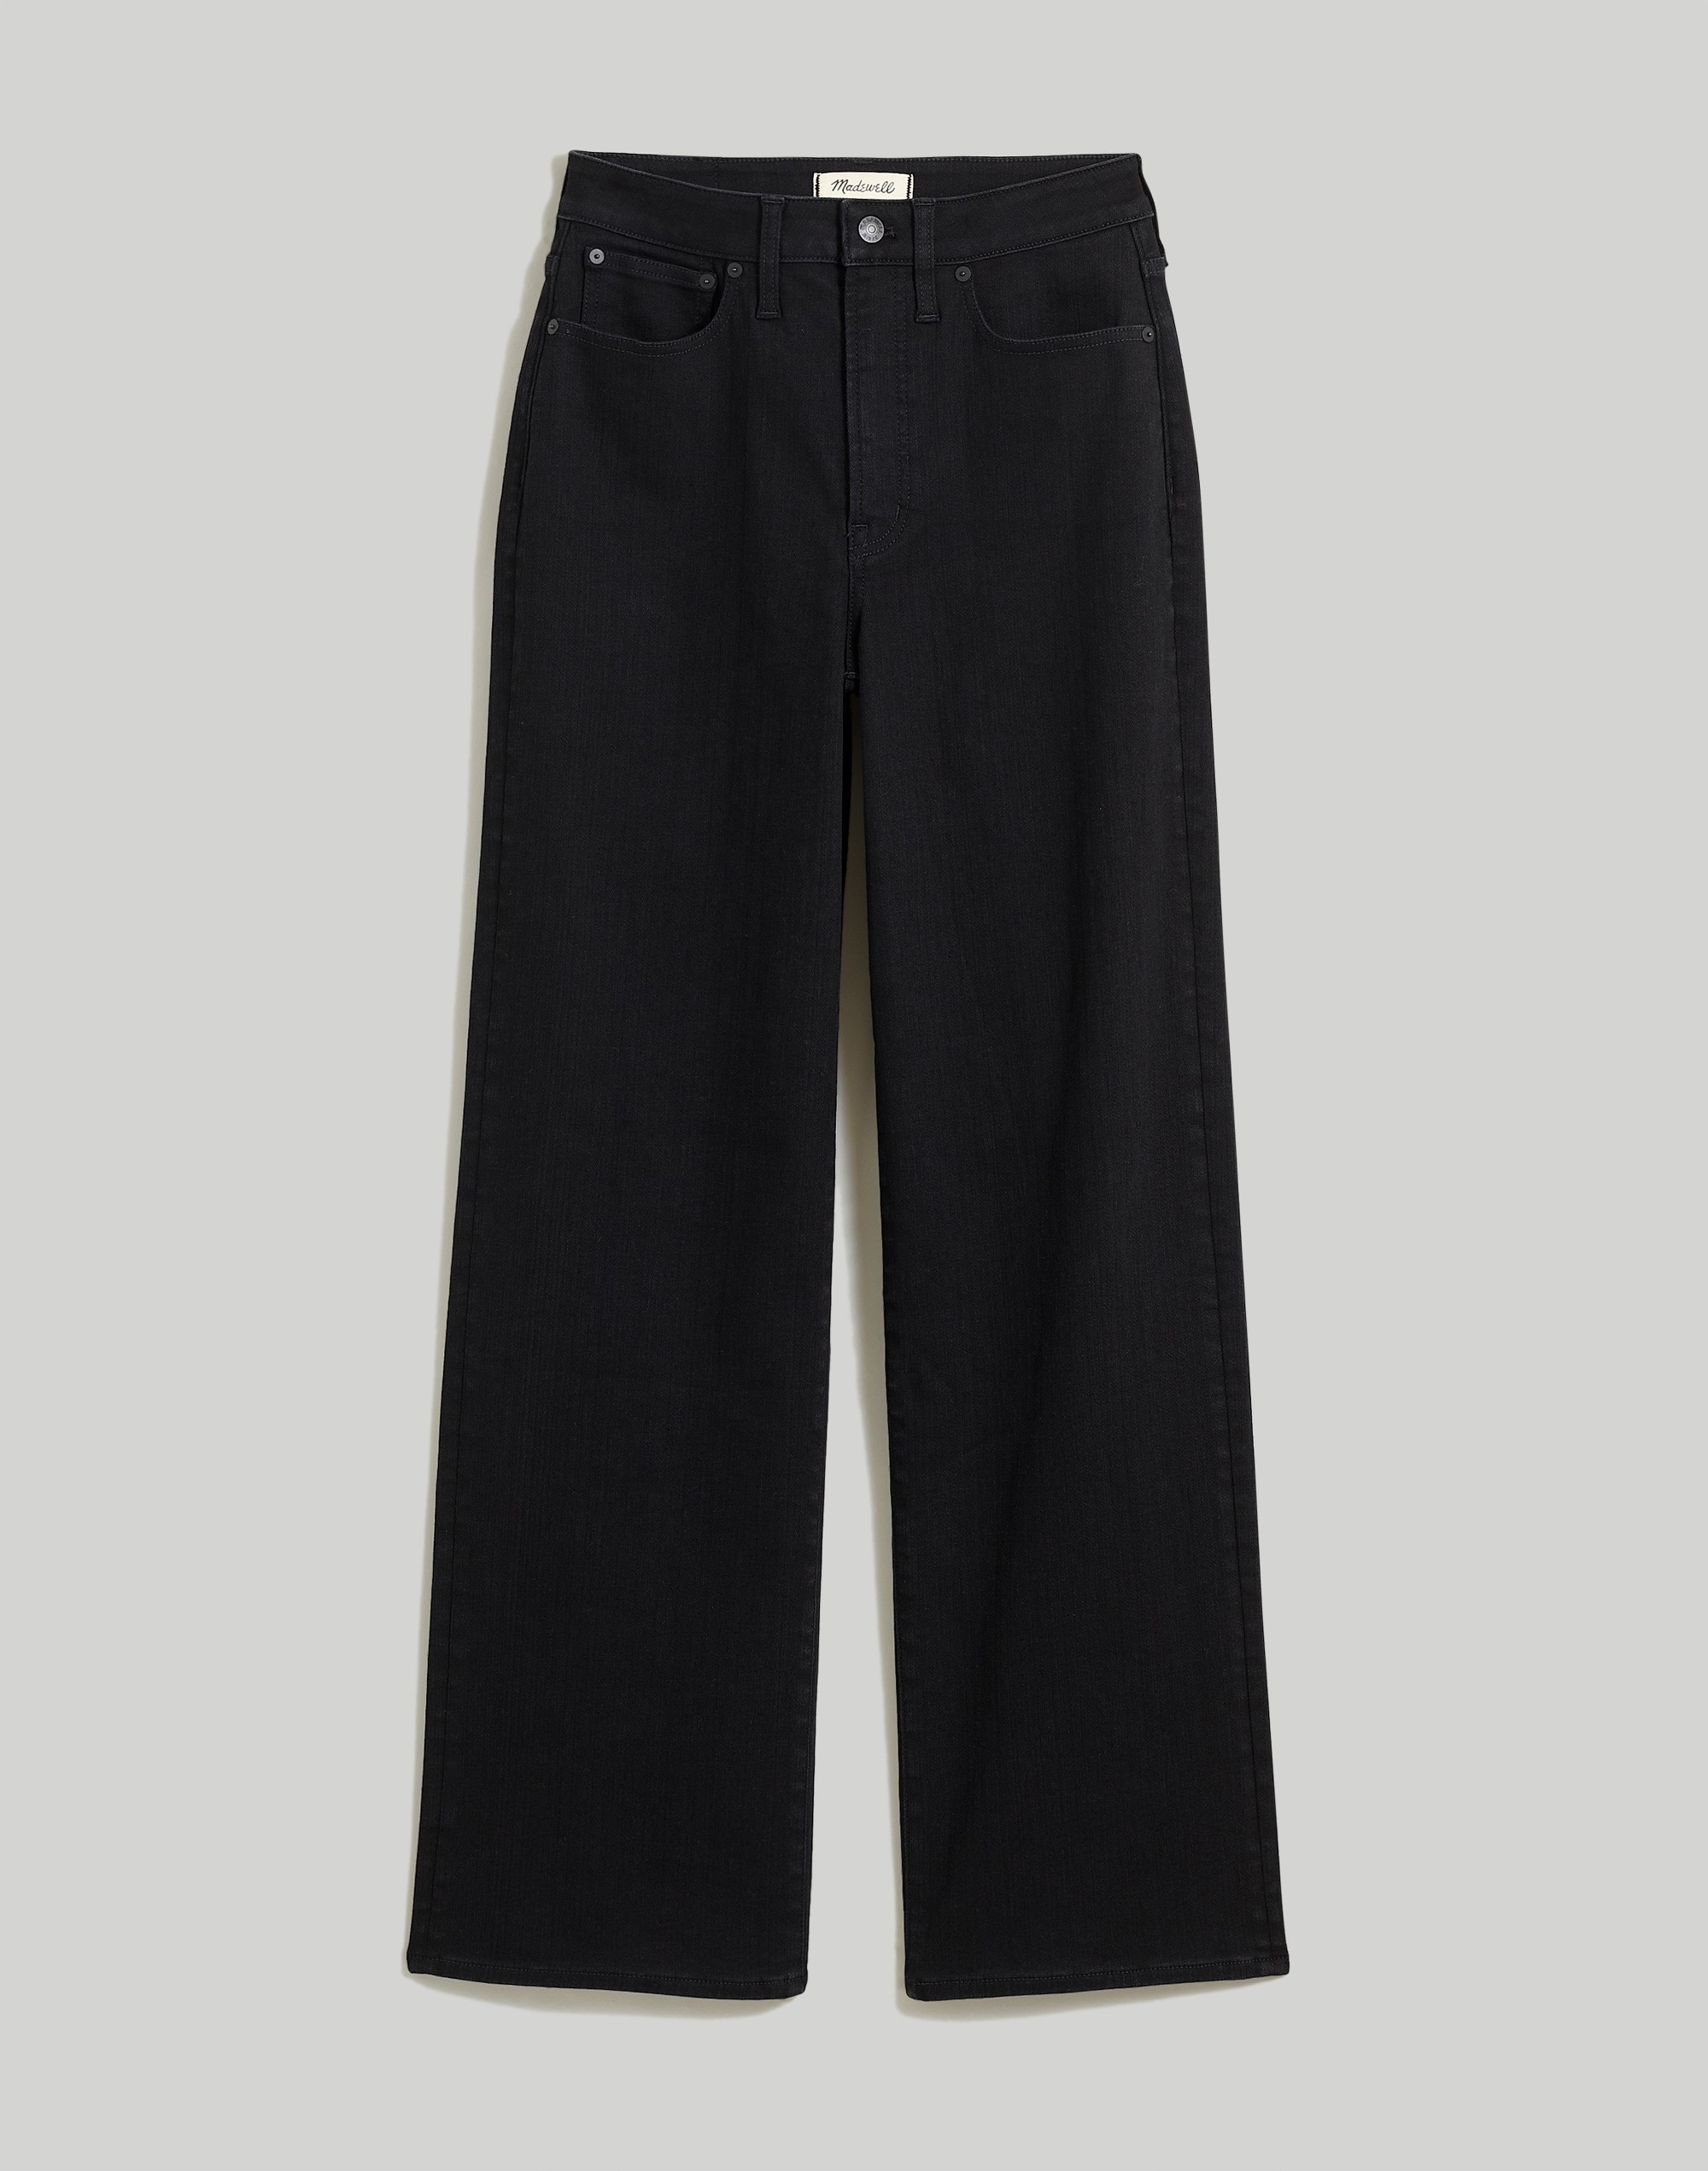 The Perfect Vintage Wide-Leg Jean in Black Rinse Wash | Madewell